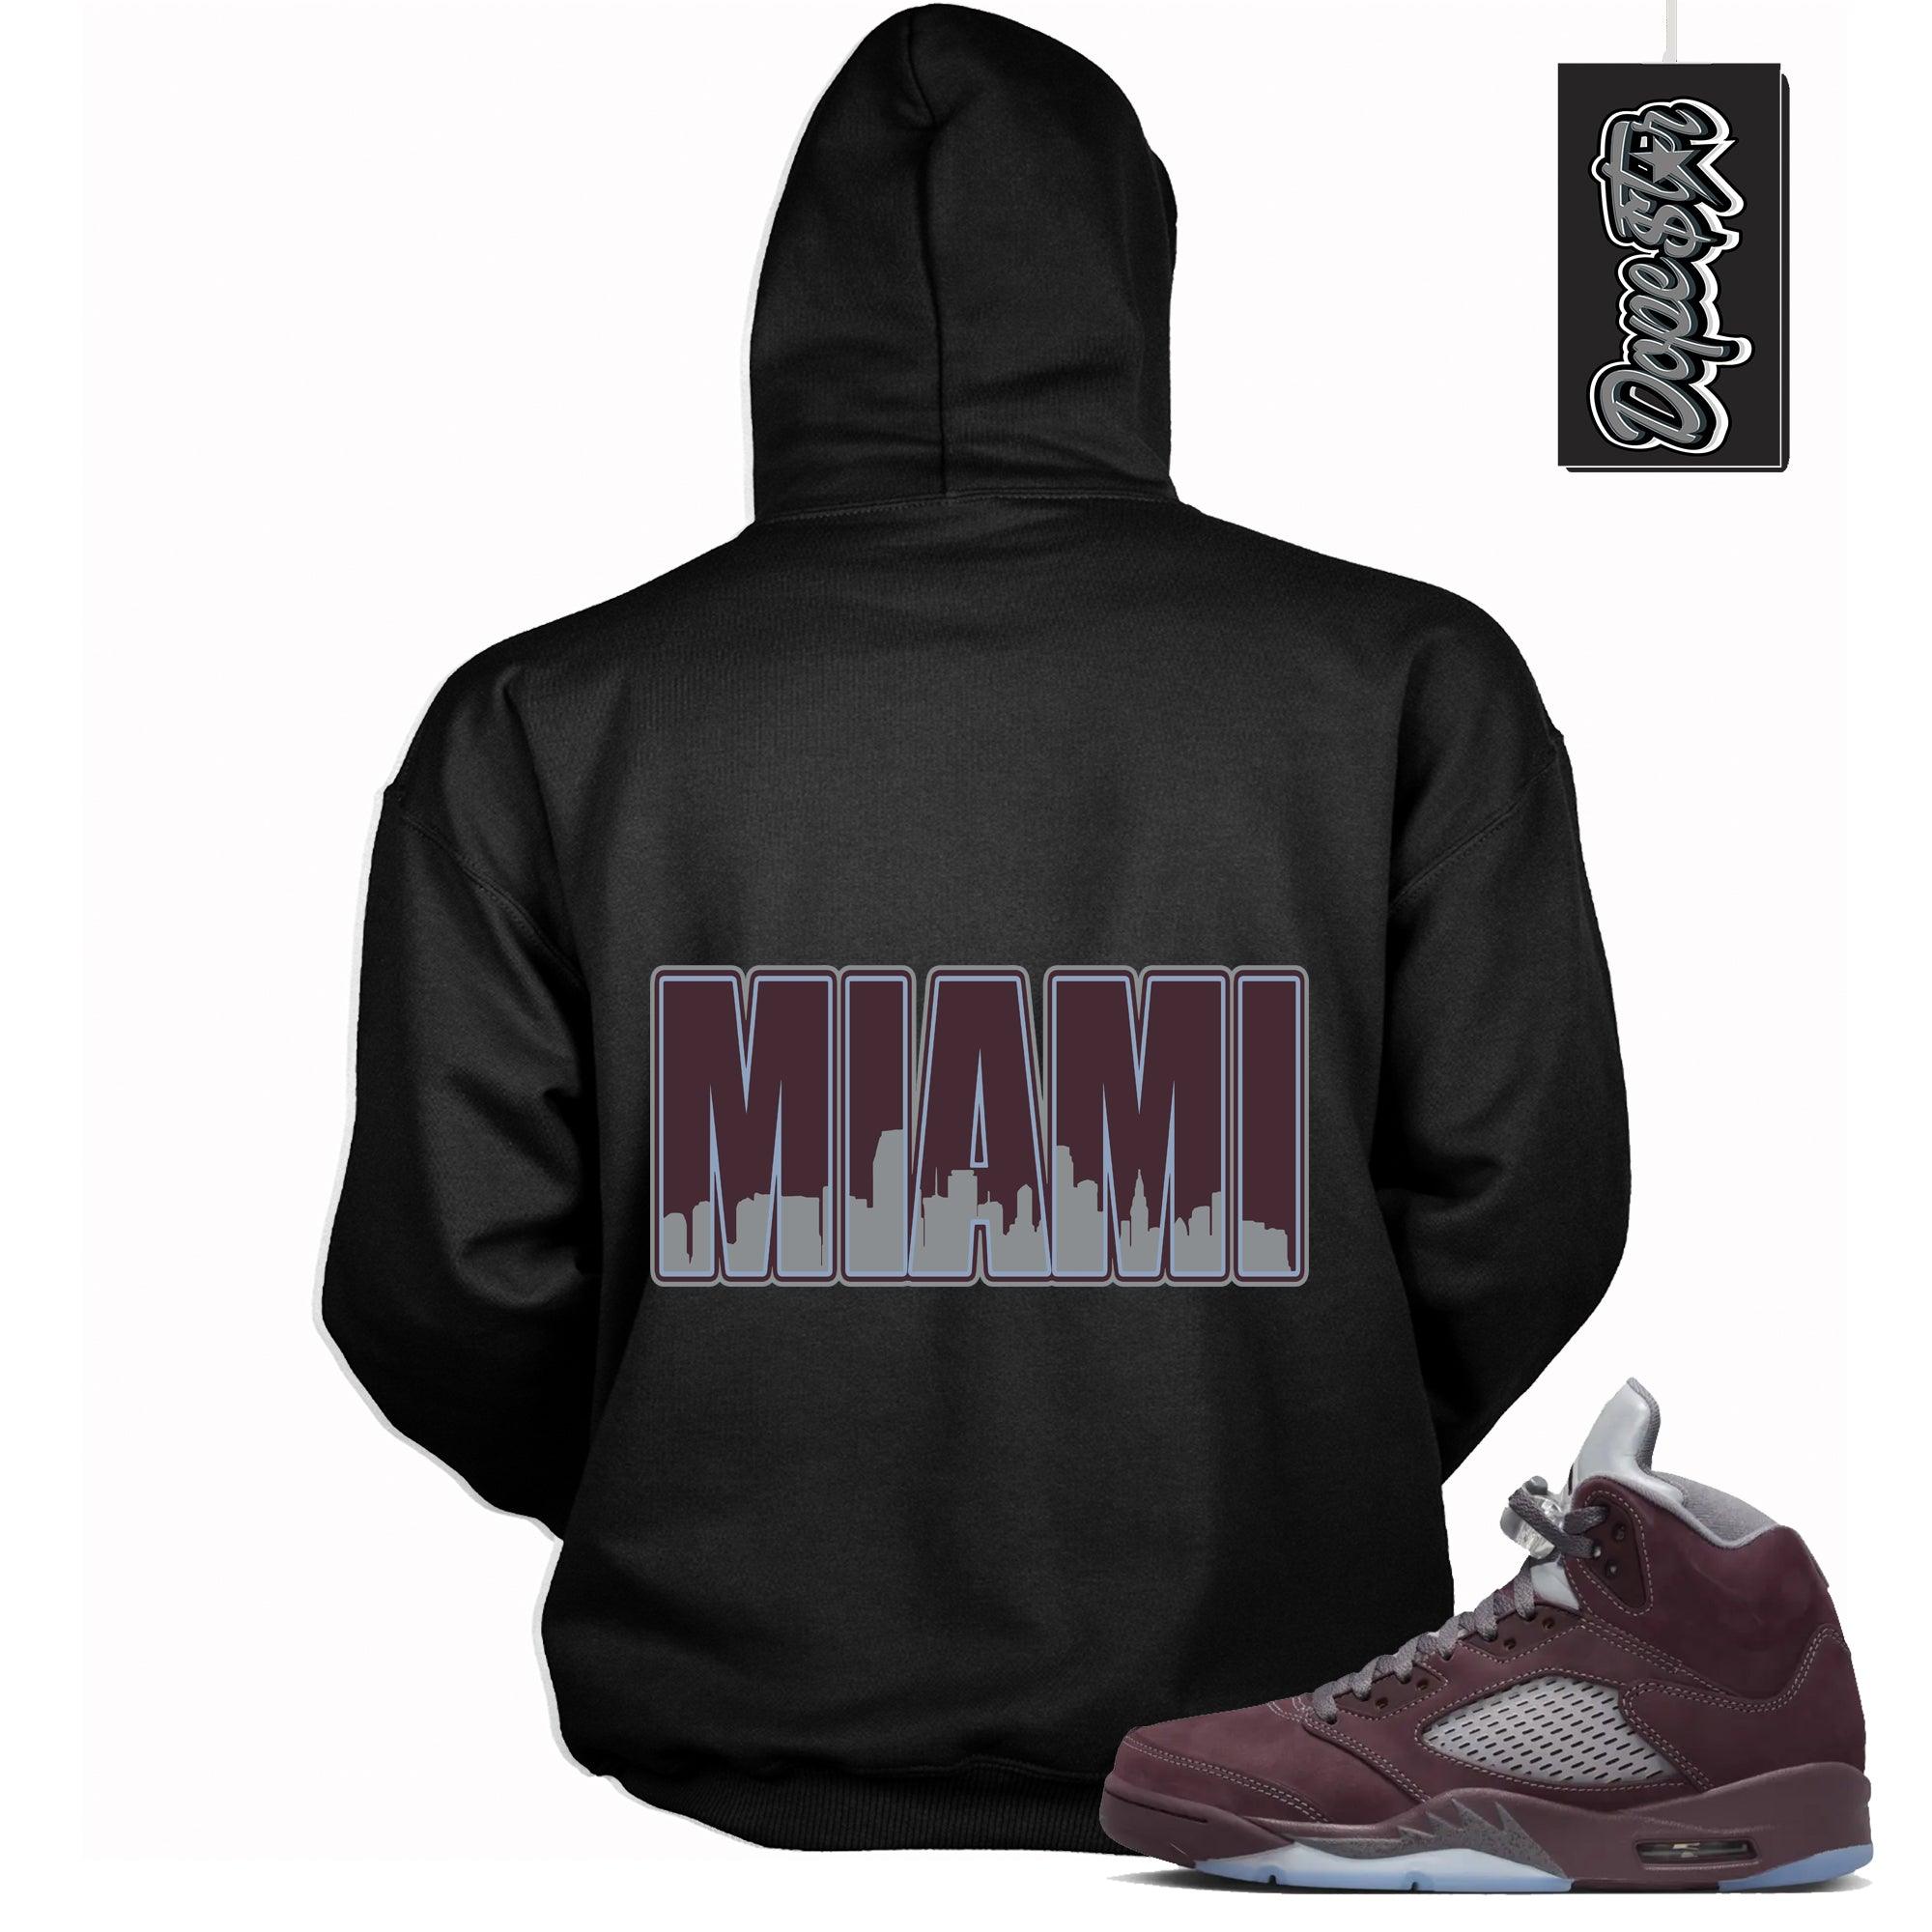 Cool Black Graphic Hoodie with “ MIAMI  “ print, that perfectly matches Air Jordan 5 Burgundy 2023 sneakers